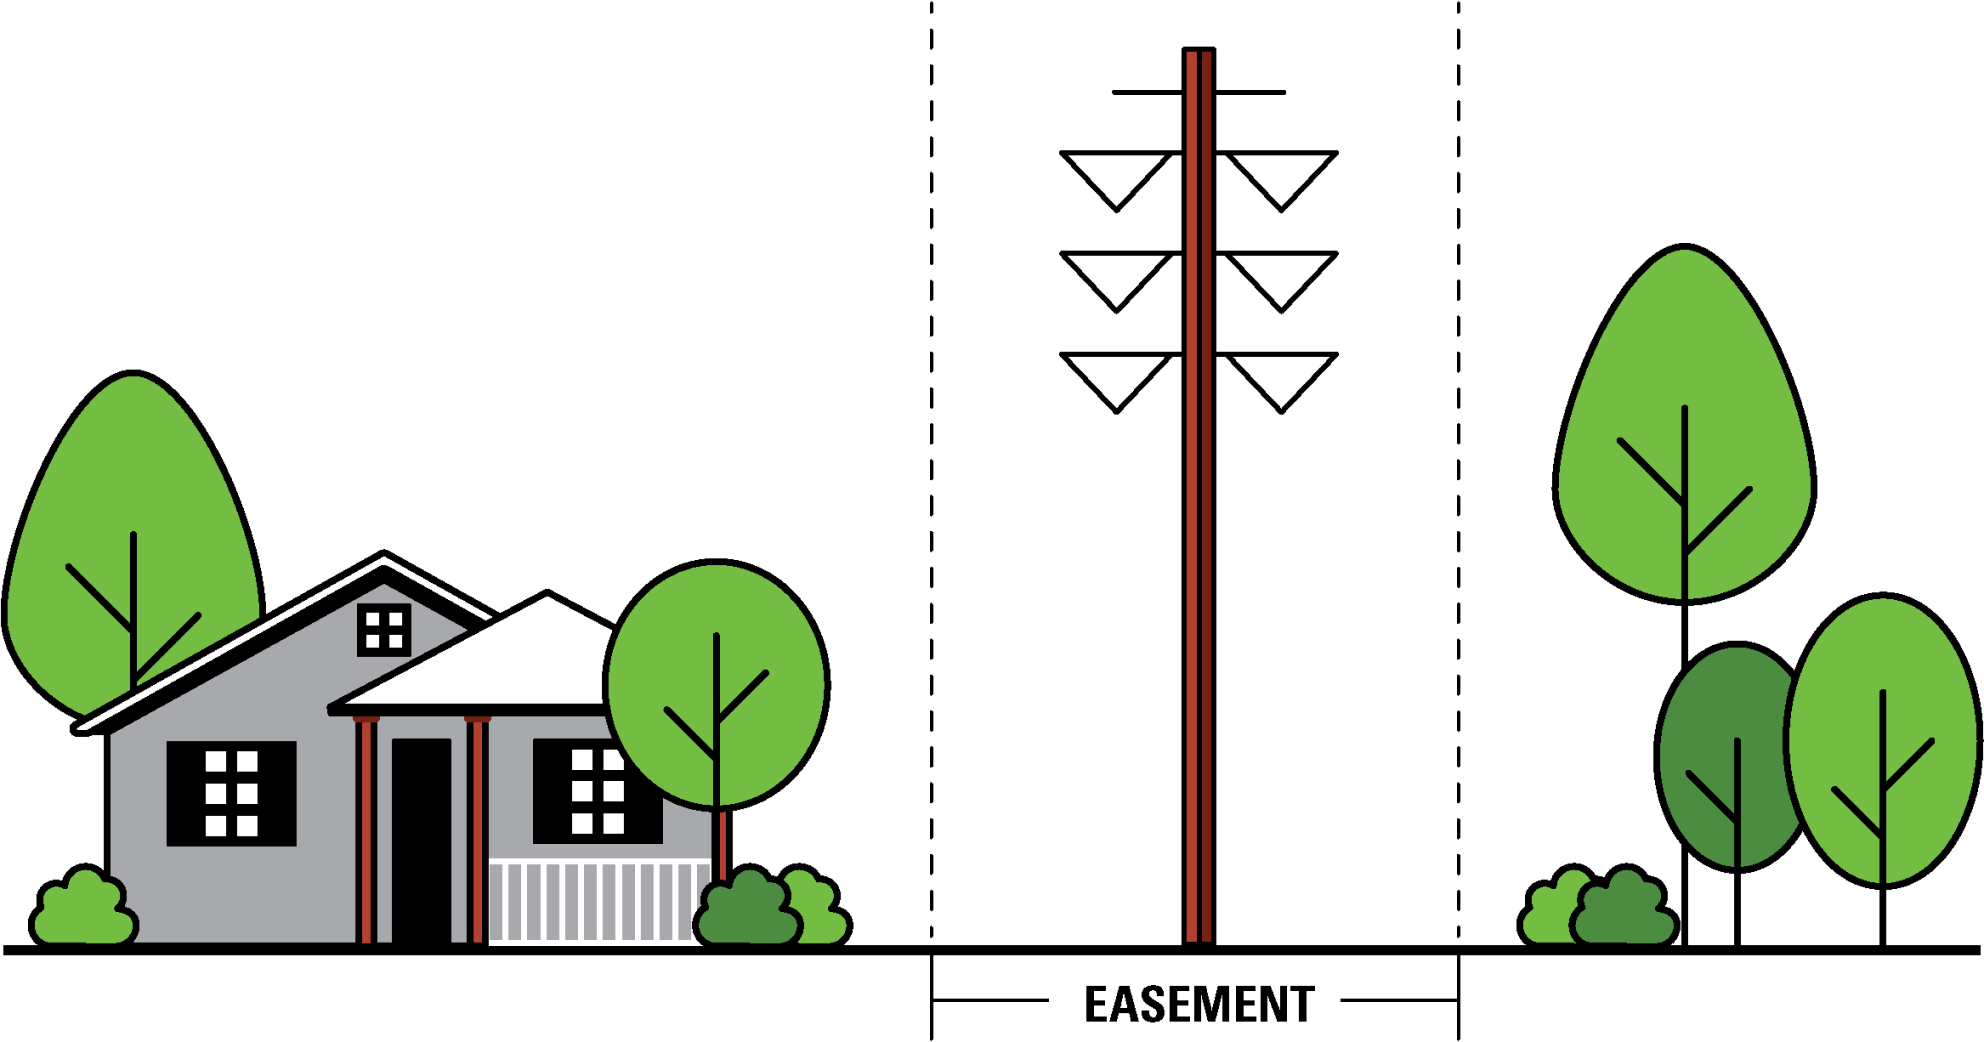 Space Required for an Easement